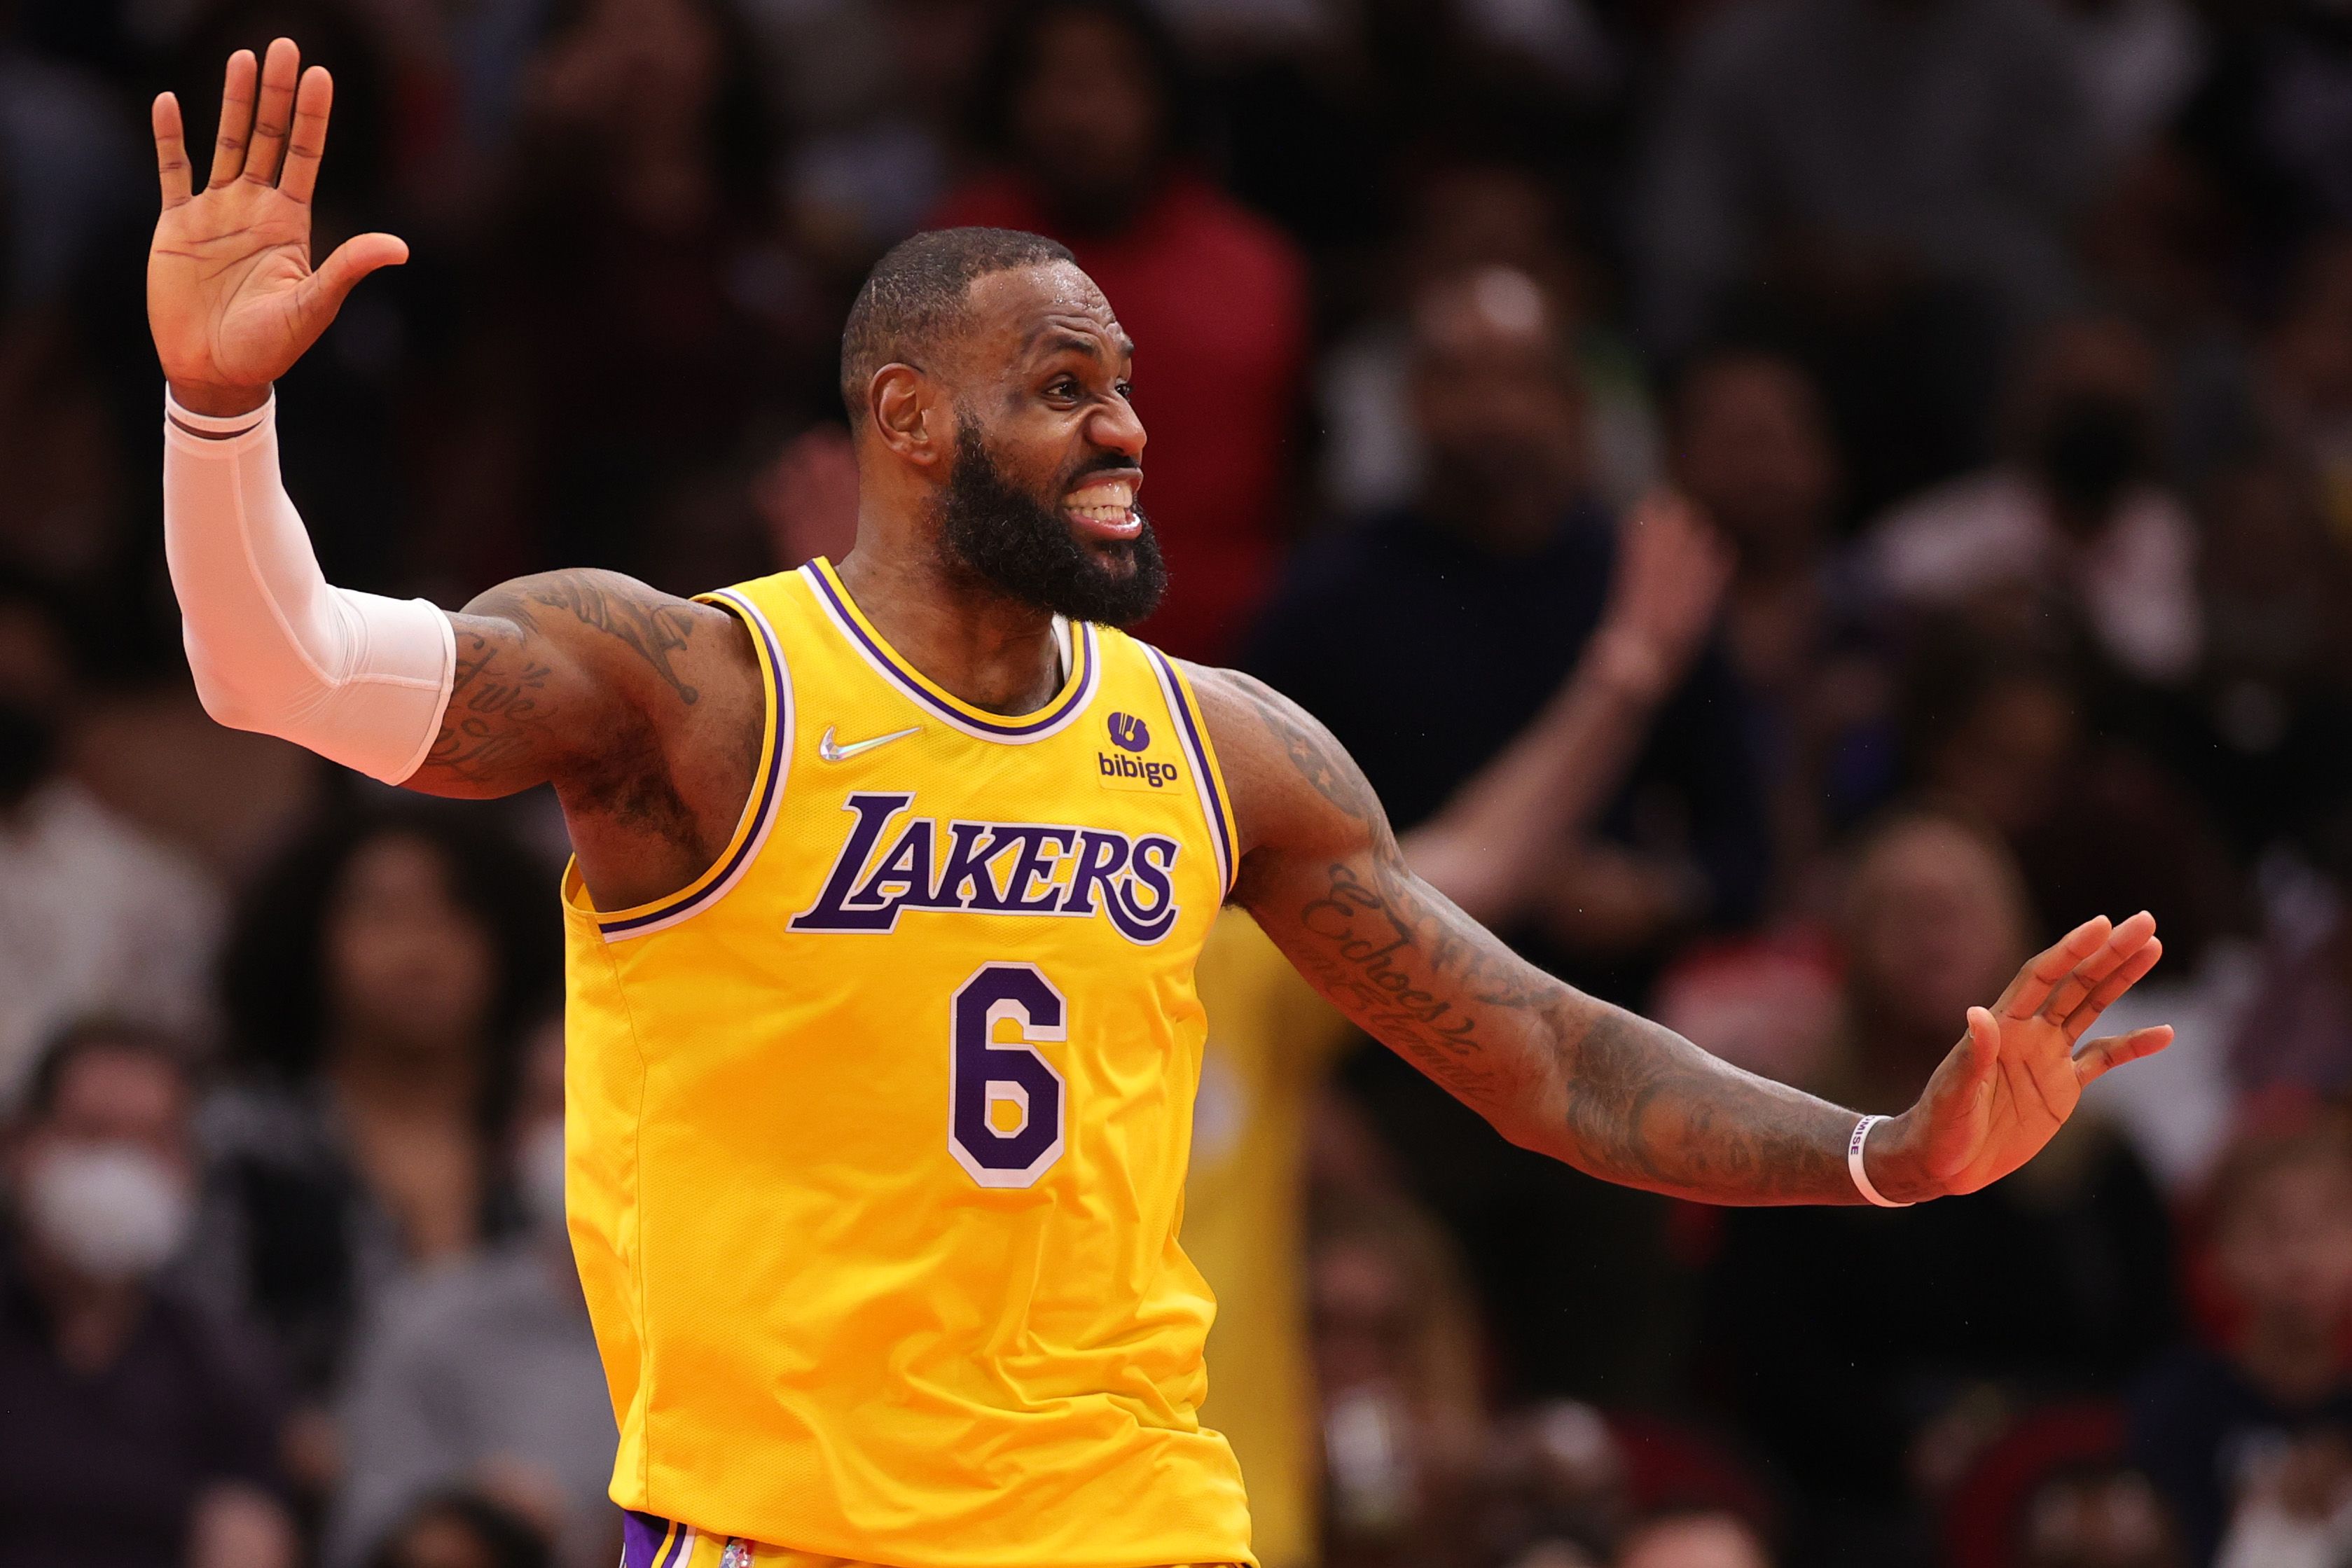 LeBron James was working out in Lakers practice facility at 4 a.m.